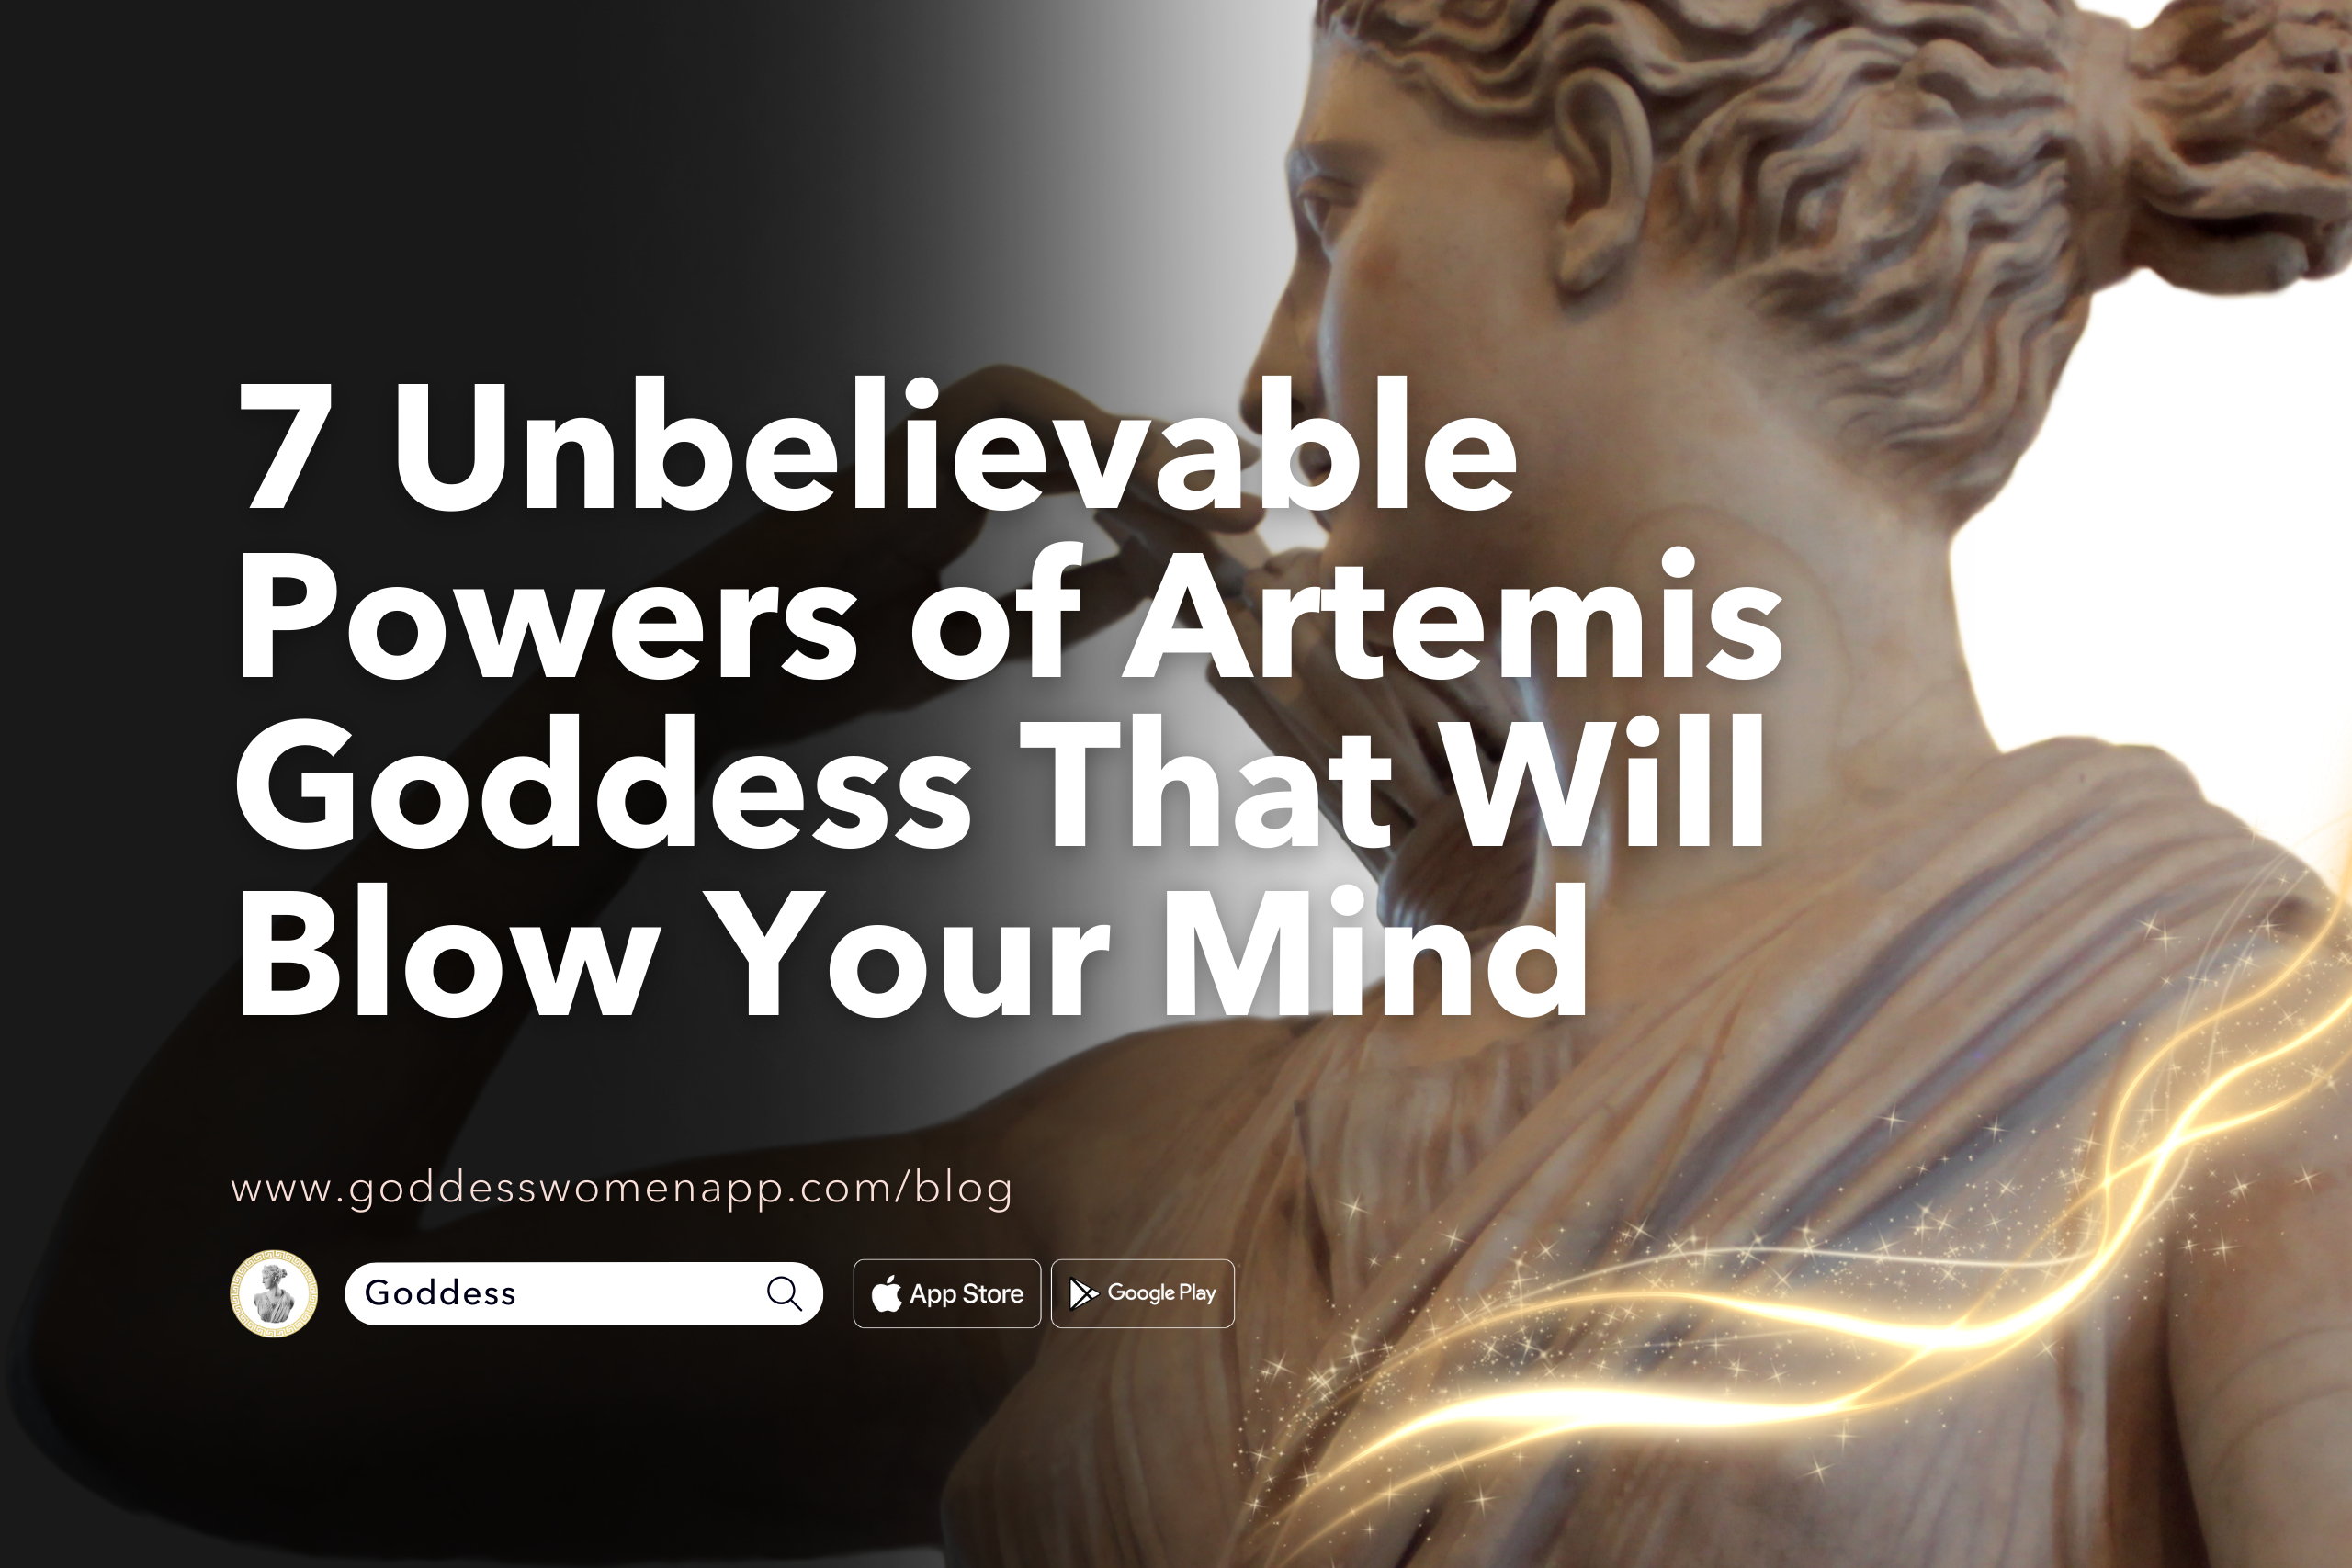 7 Unbelievable Powers of Artemis Goddess That Will Blow Your Mind